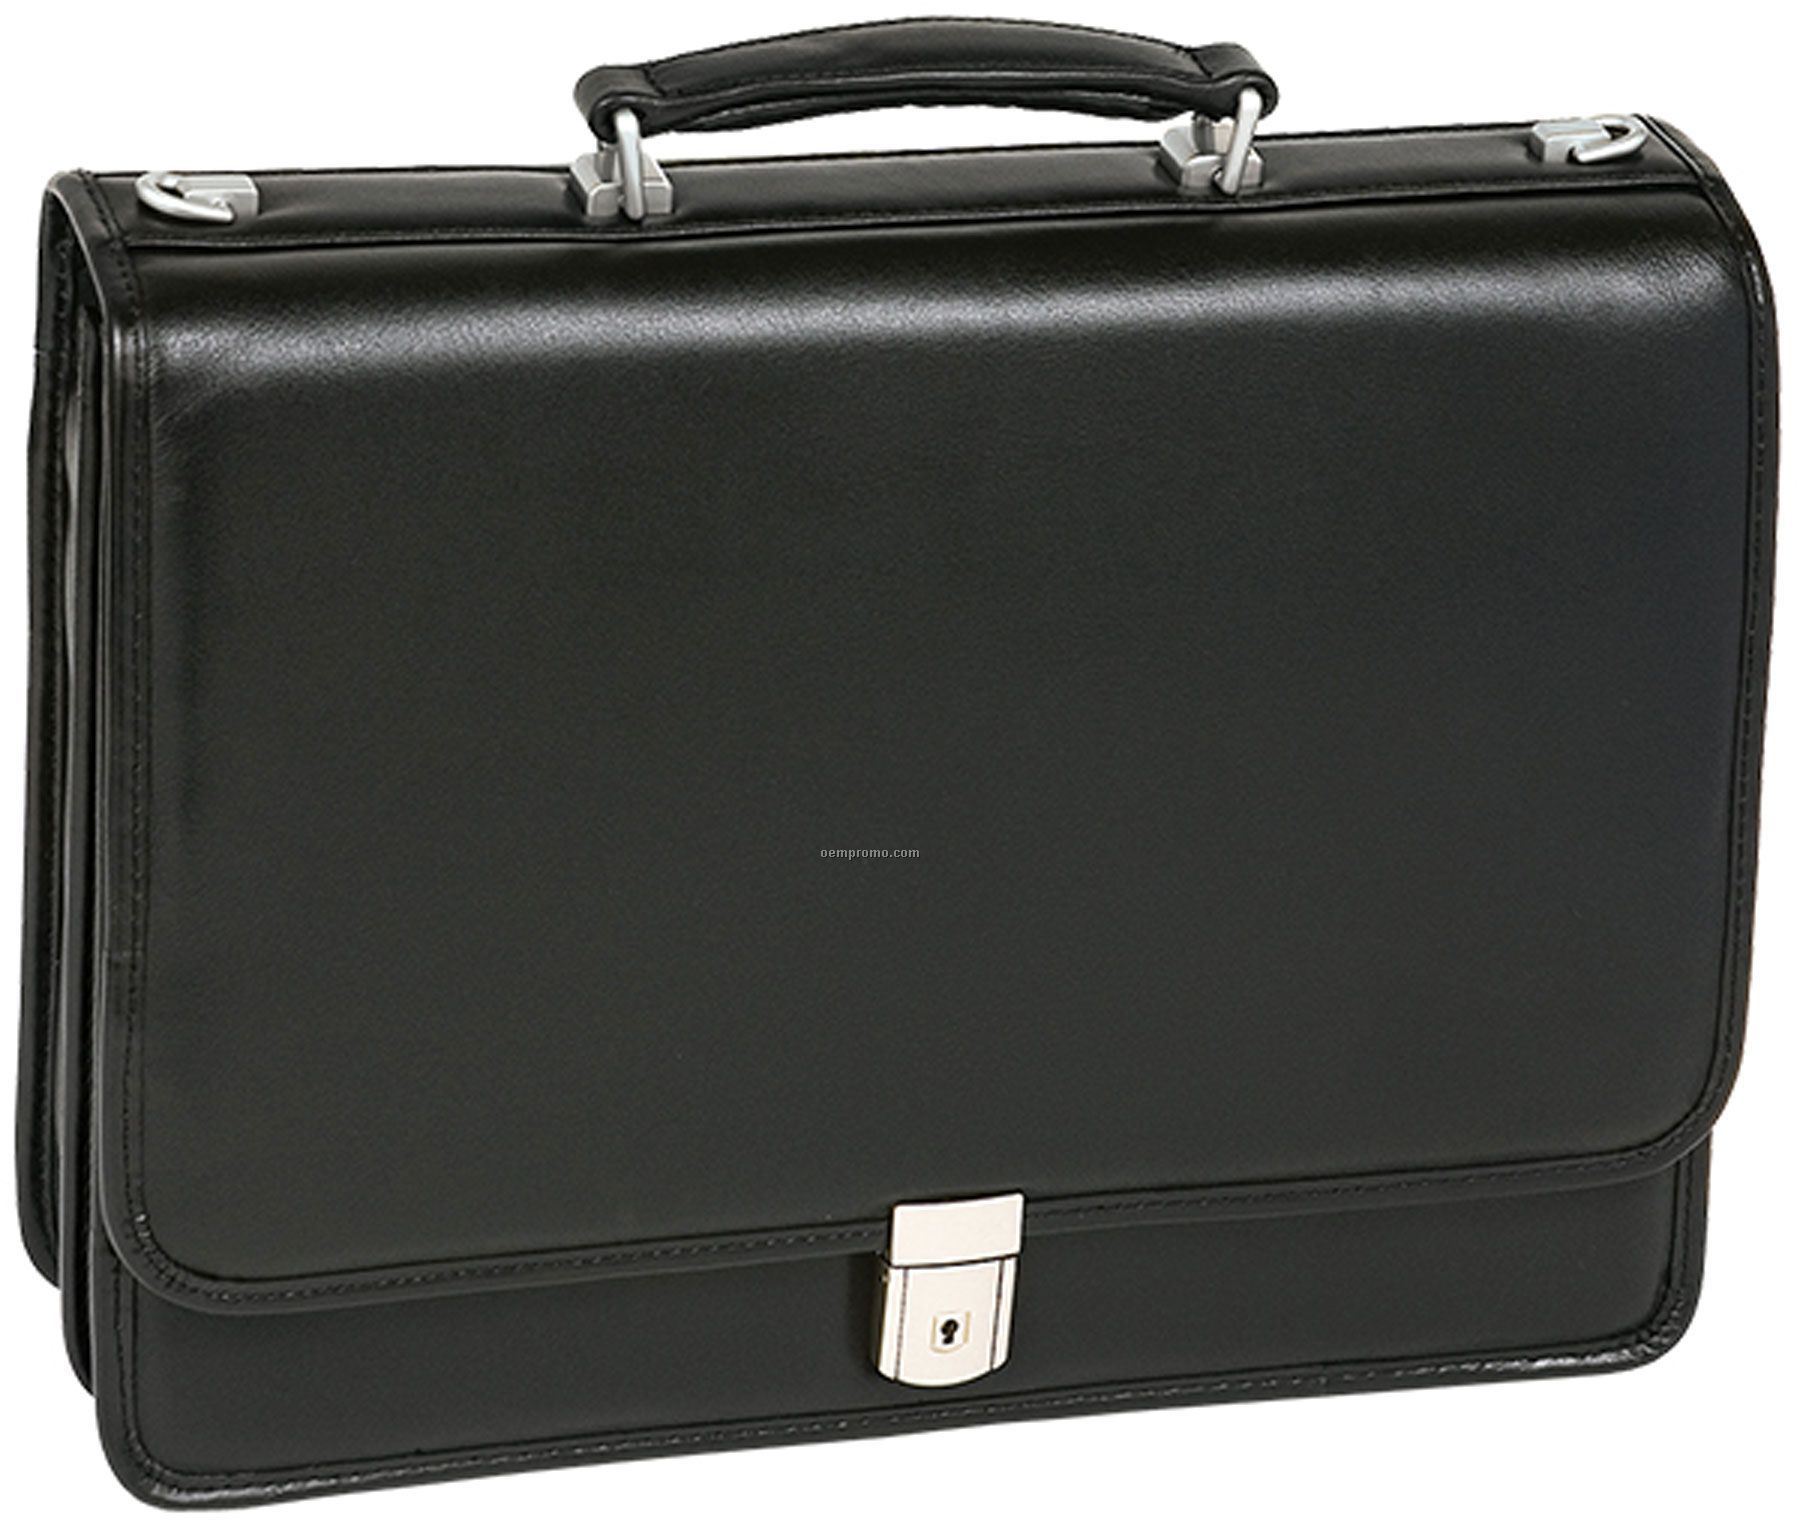 Bucktown Leather Double Compartment Briefcase